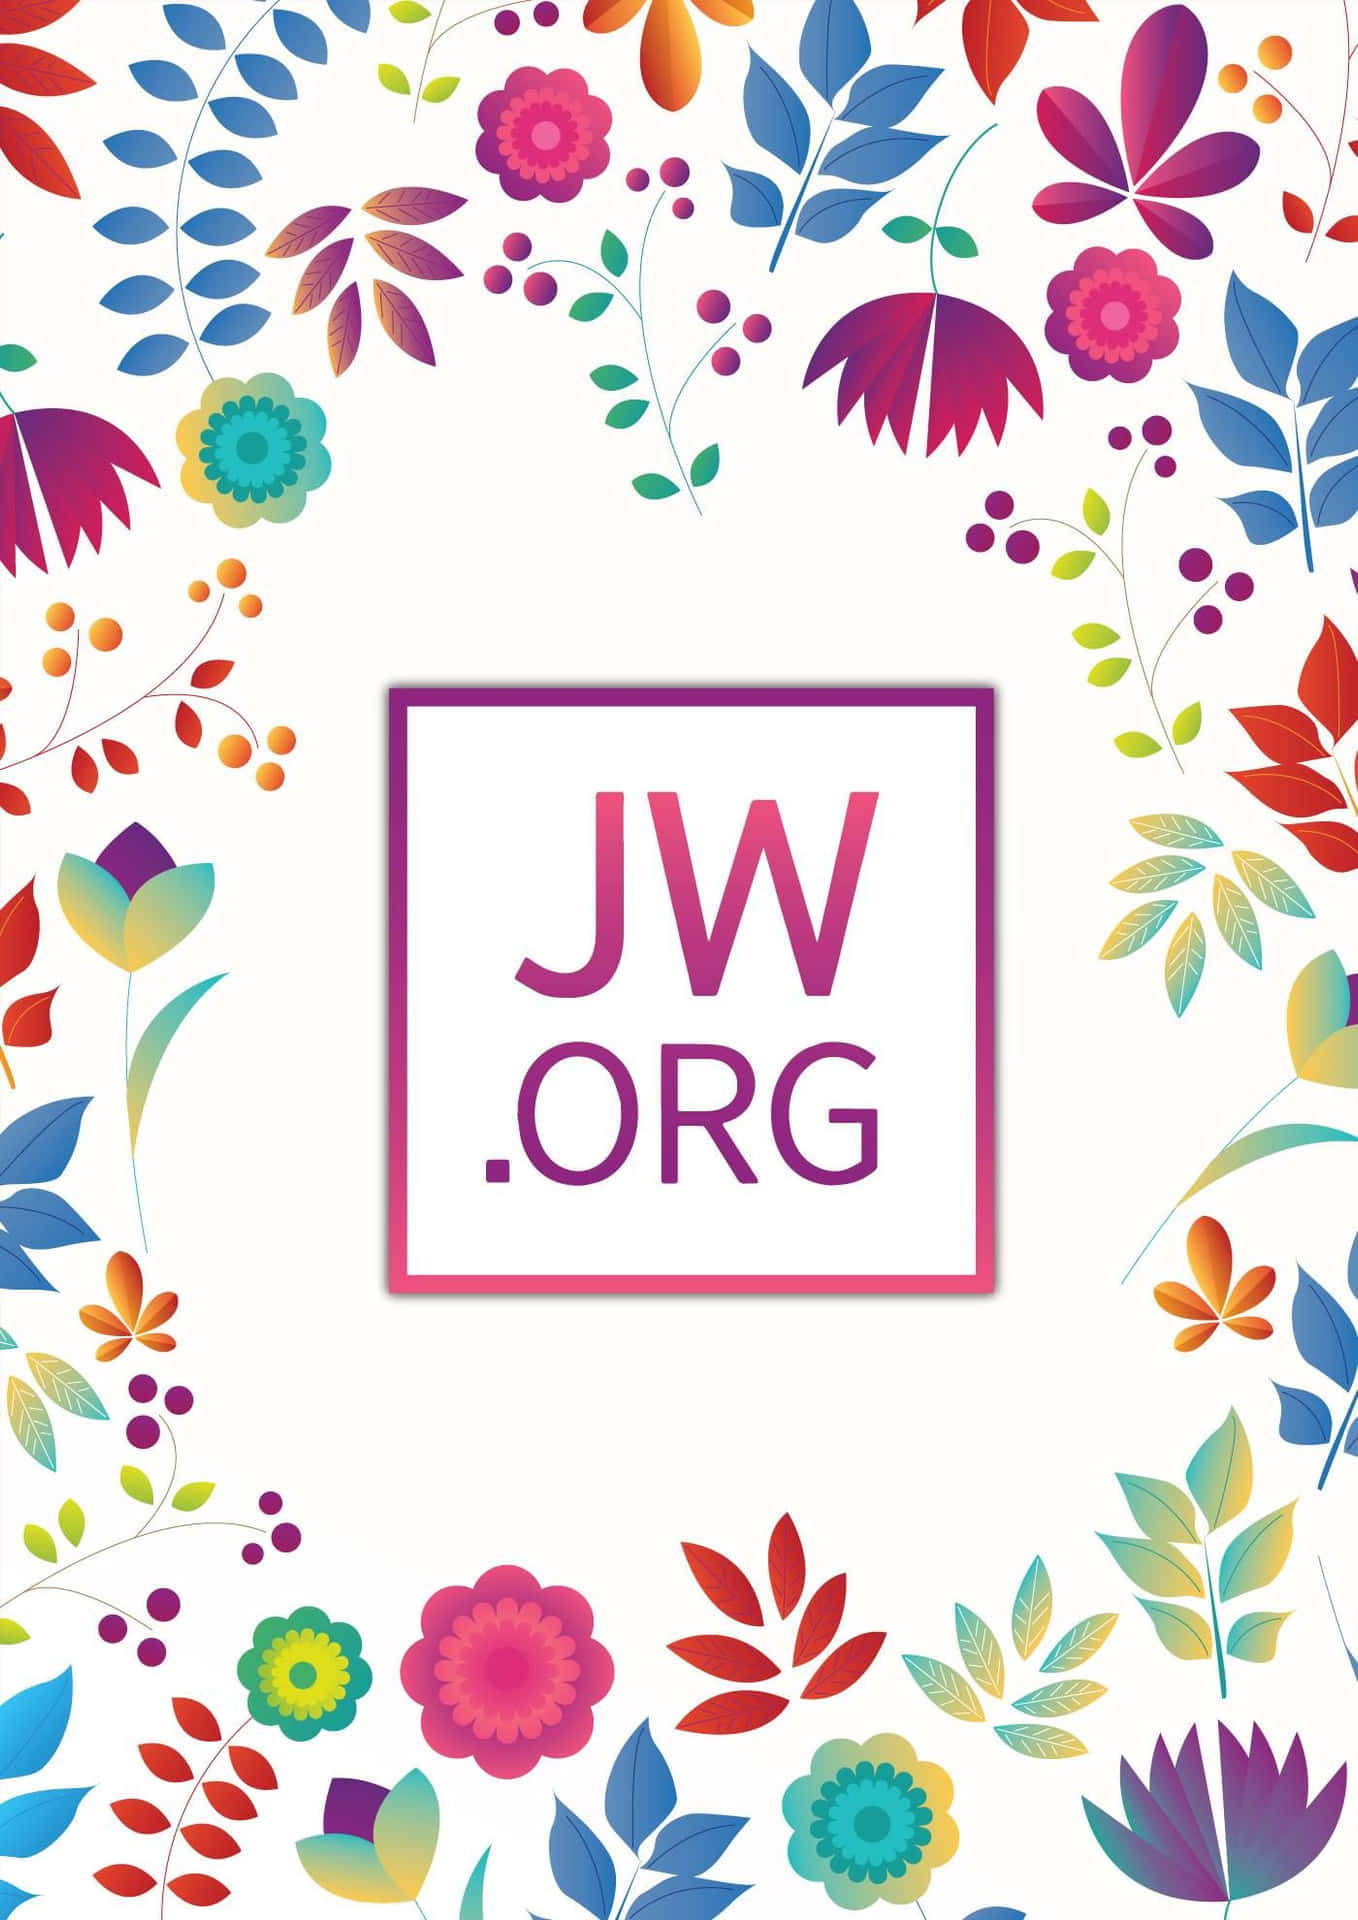 JWorg Logo With Floral Elements Wallpaper